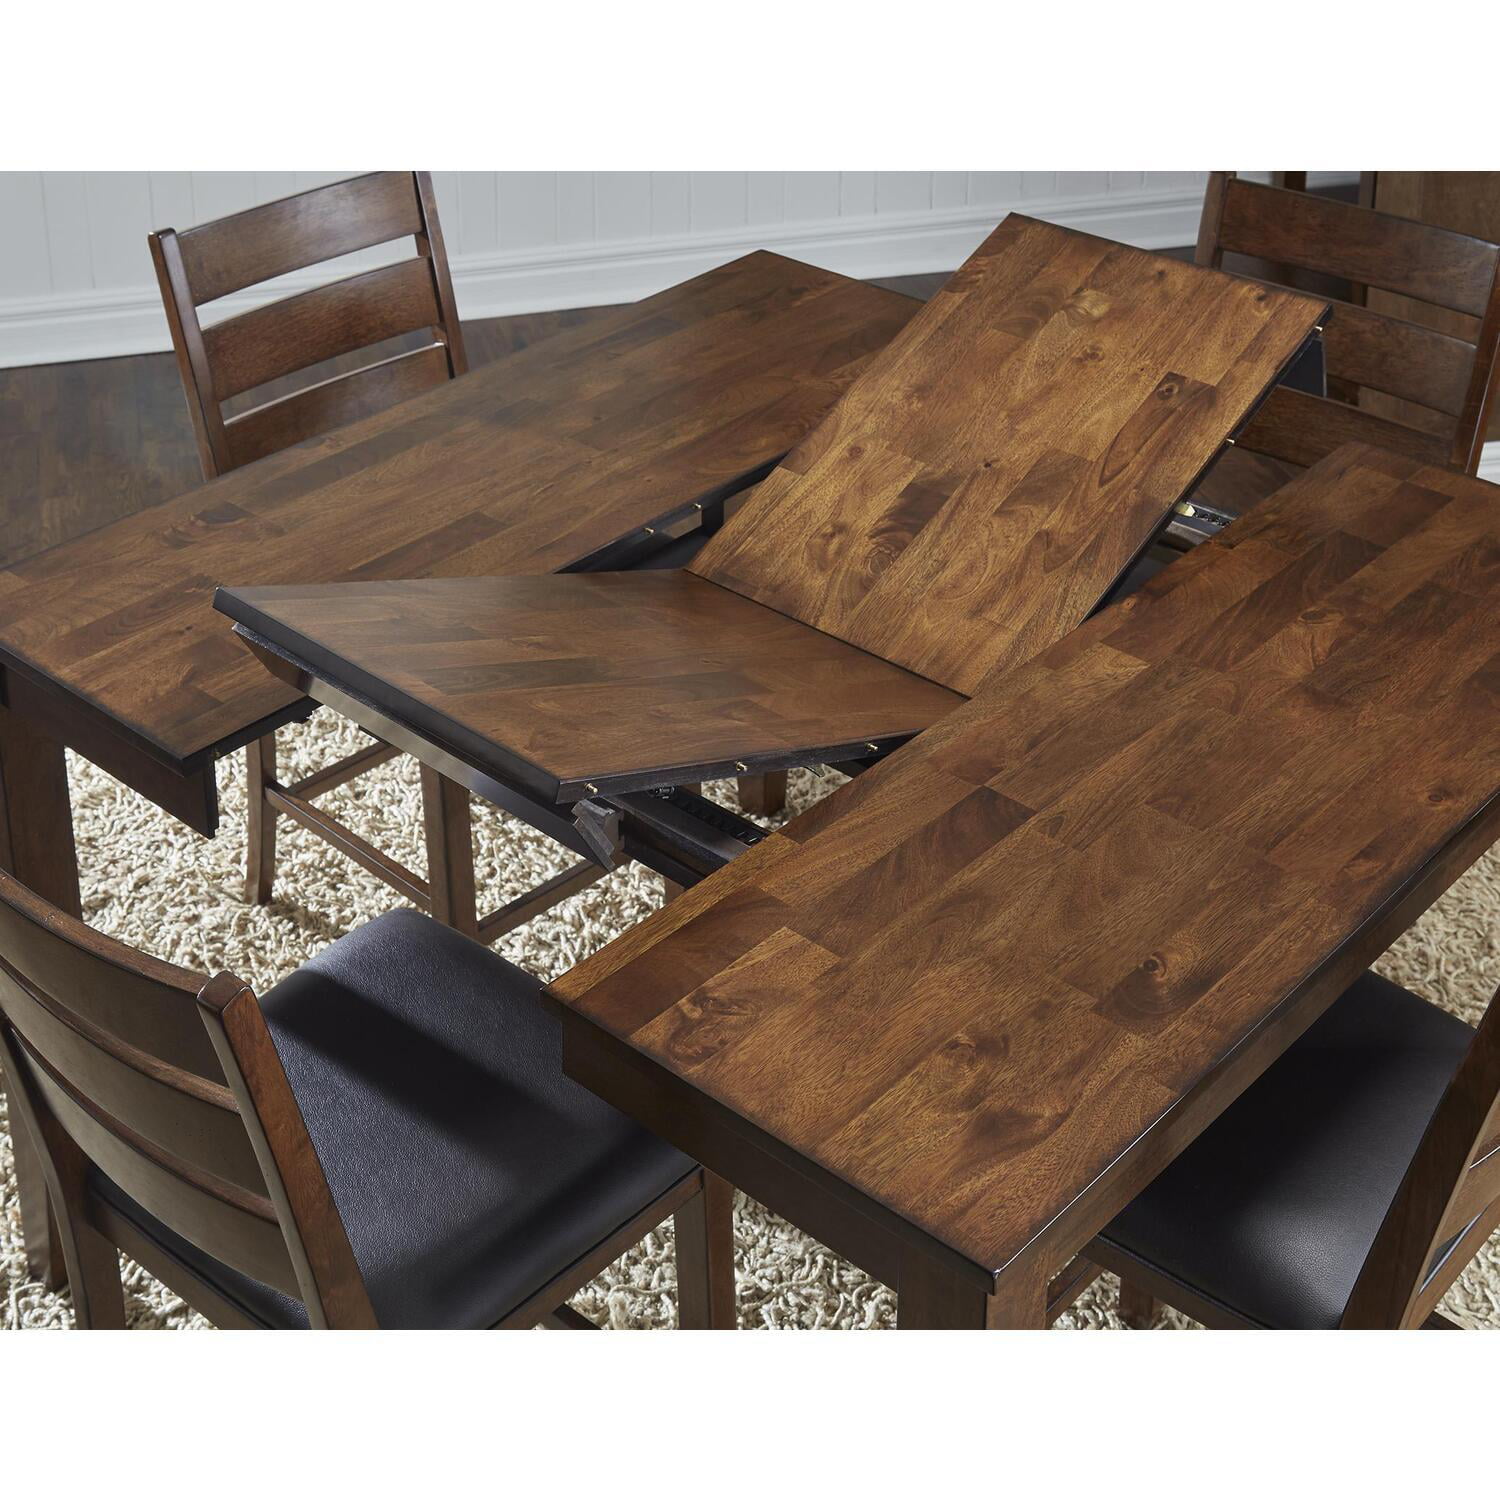 A America Mason 36 54 Square Gather Height Dining Table With 18 Butterfly Leaf Walmartcom Walmartcom